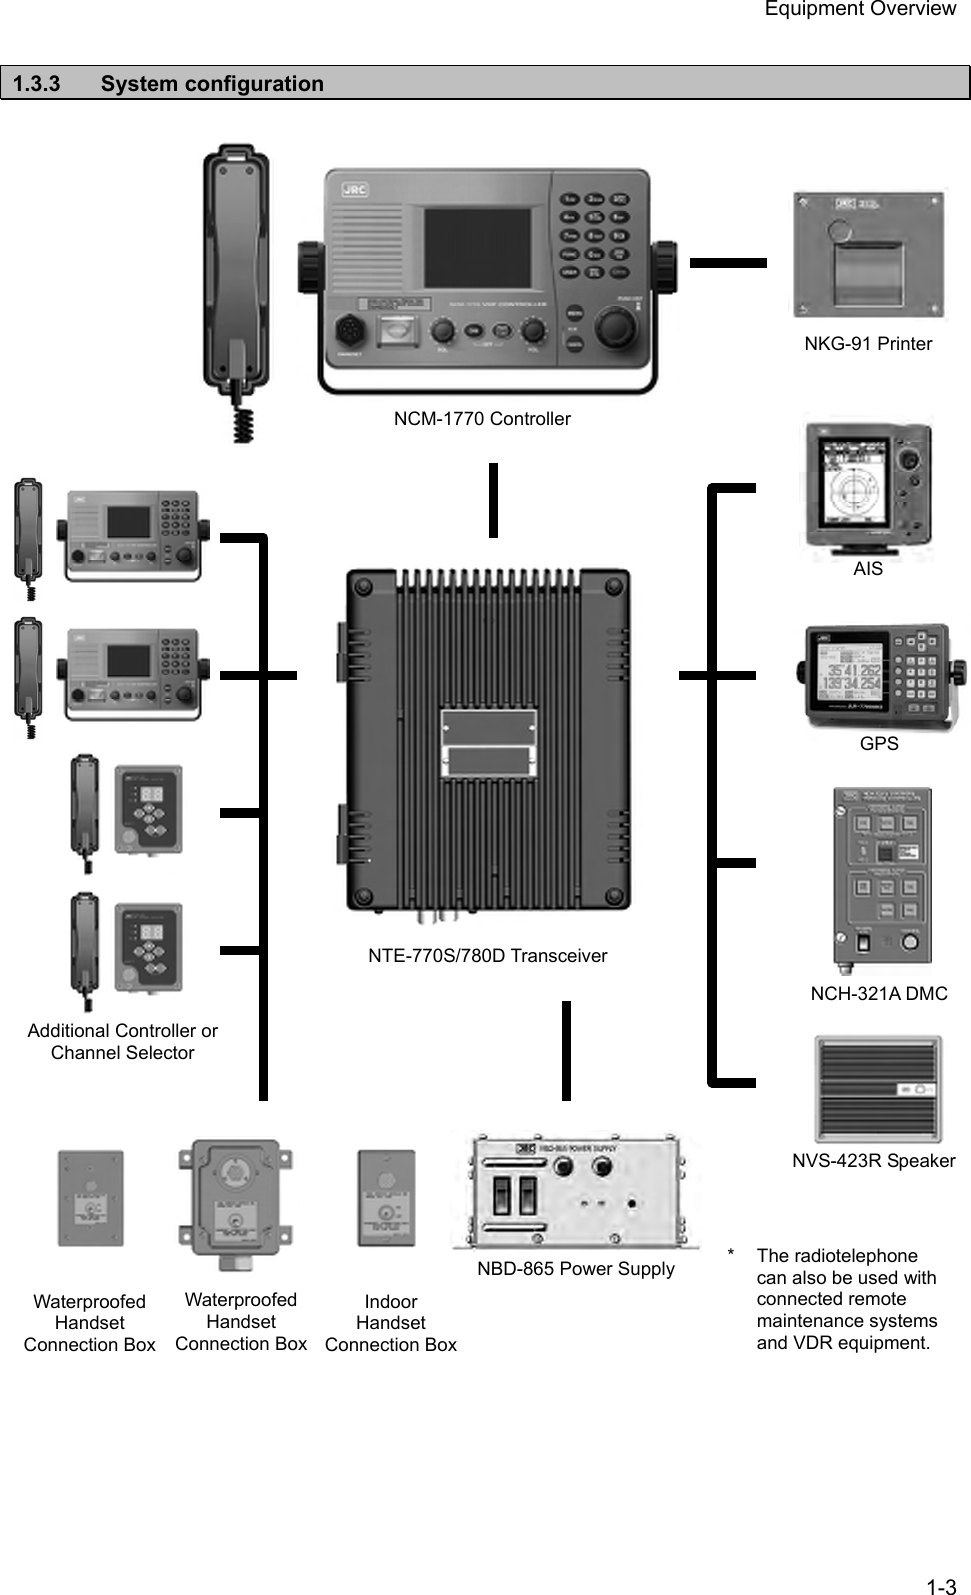 Equipment Overview 1-3  1.3.3 System configuration                                                    NBD-865 Power SupplyNCH-321A DMC GPS AIS NKG-91 Printer NCM-1770 Controller NTE-770S/780D Transceiver NVS-423R Speaker Additional Controller or Channel Selector Indoor Handset Connection Box* The radiotelephone can also be used with connected remote maintenance systems and VDR equipment. Waterproofed Handset Connection Box Waterproofed Handset Connection Box 